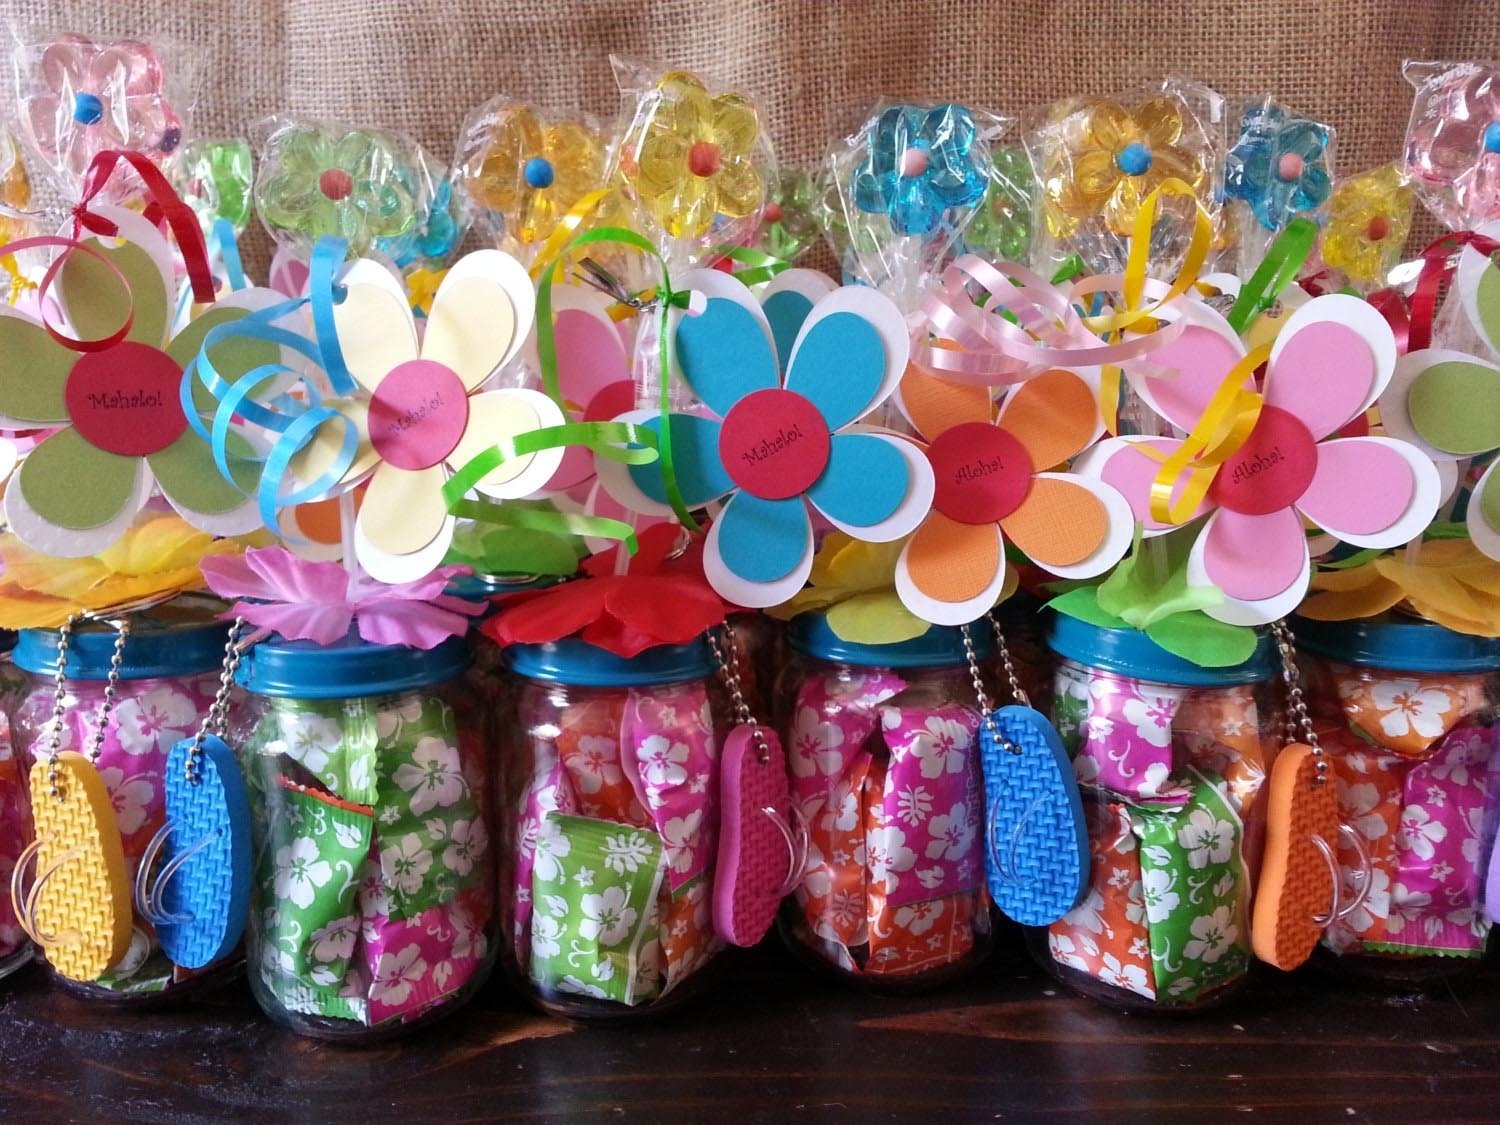 10 Cute Party Favors Ideas For Kids useful kids party favors birthday party pinterest kids party 2022